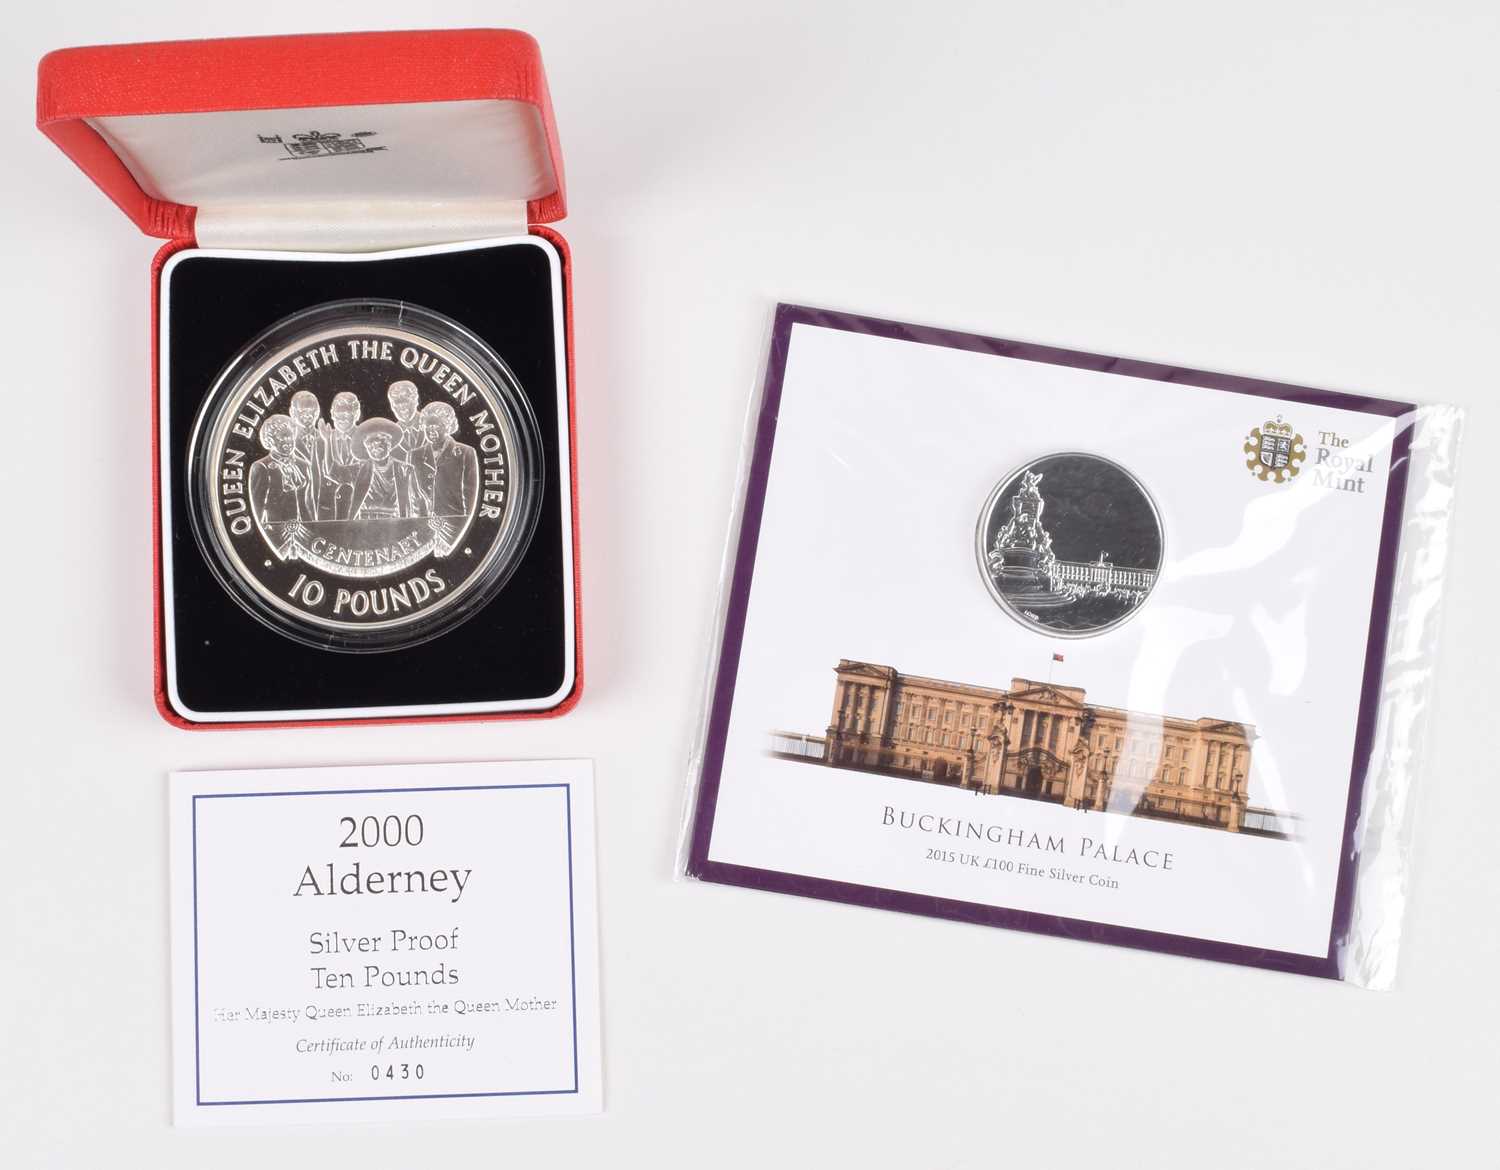 Lot 75 - 2000 Alderney Silver Proof Ten Pounds and Buckingham Palace £100 Silver Coin (2).